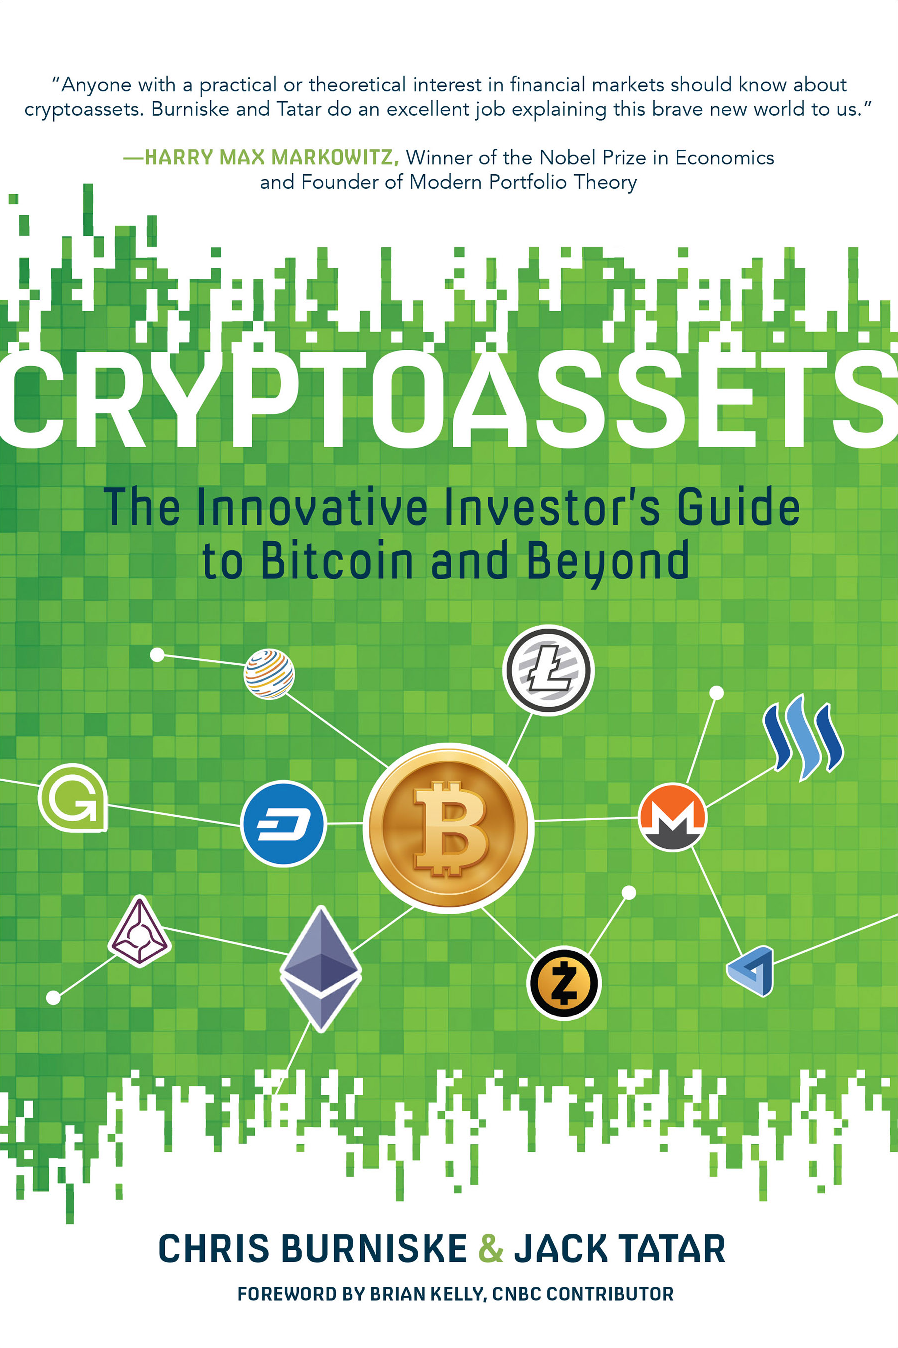 Cryptoassets The Innovative Investor S Guide To Bitcoin And Beyond 2017